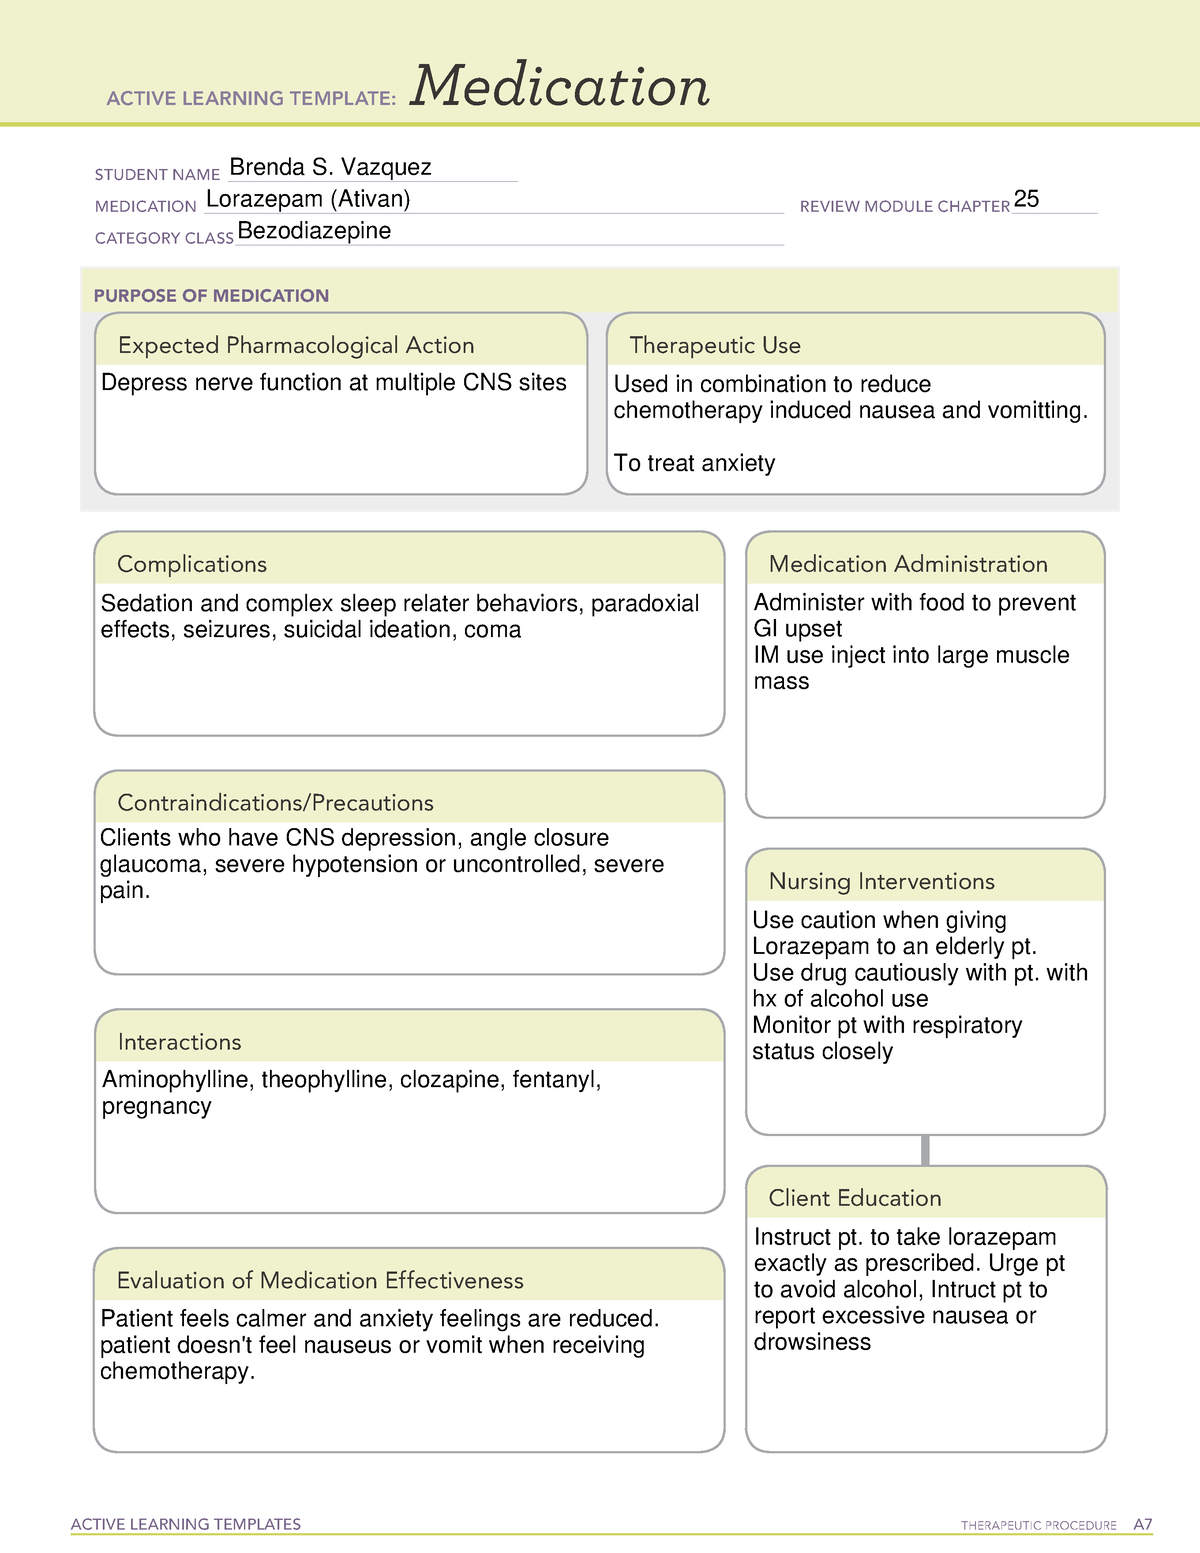 Lorazepam med card ACTIVE LEARNING TEMPLATES THERAPEUTIC PROCEDURE